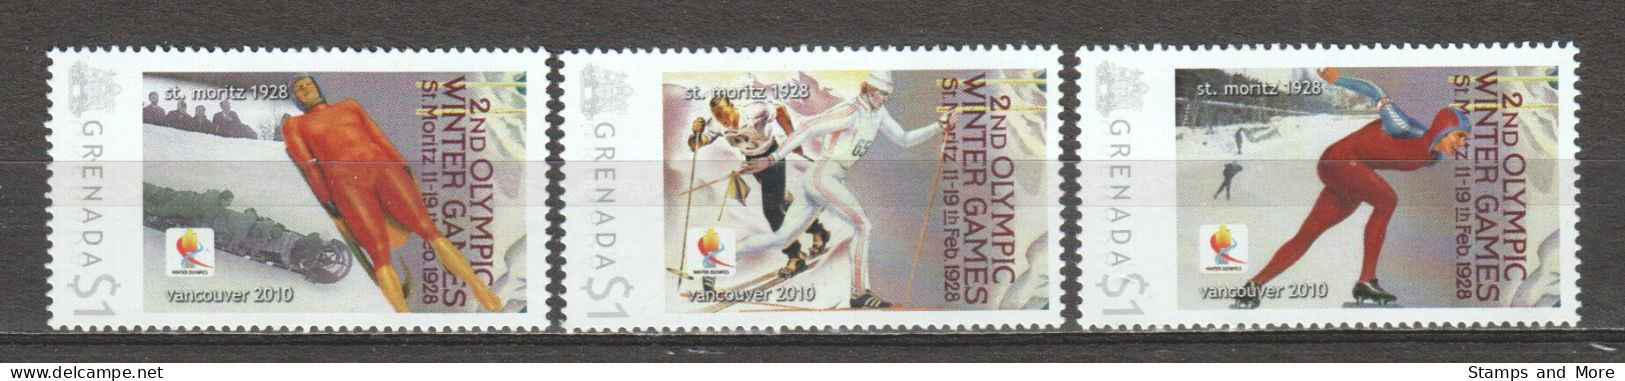 Grenada - Limited Edition Serie 02 MNH - WINTER OLYMPICS VANCOUVER 2010 - St Moritz 1928 - Hiver 2010: Vancouver